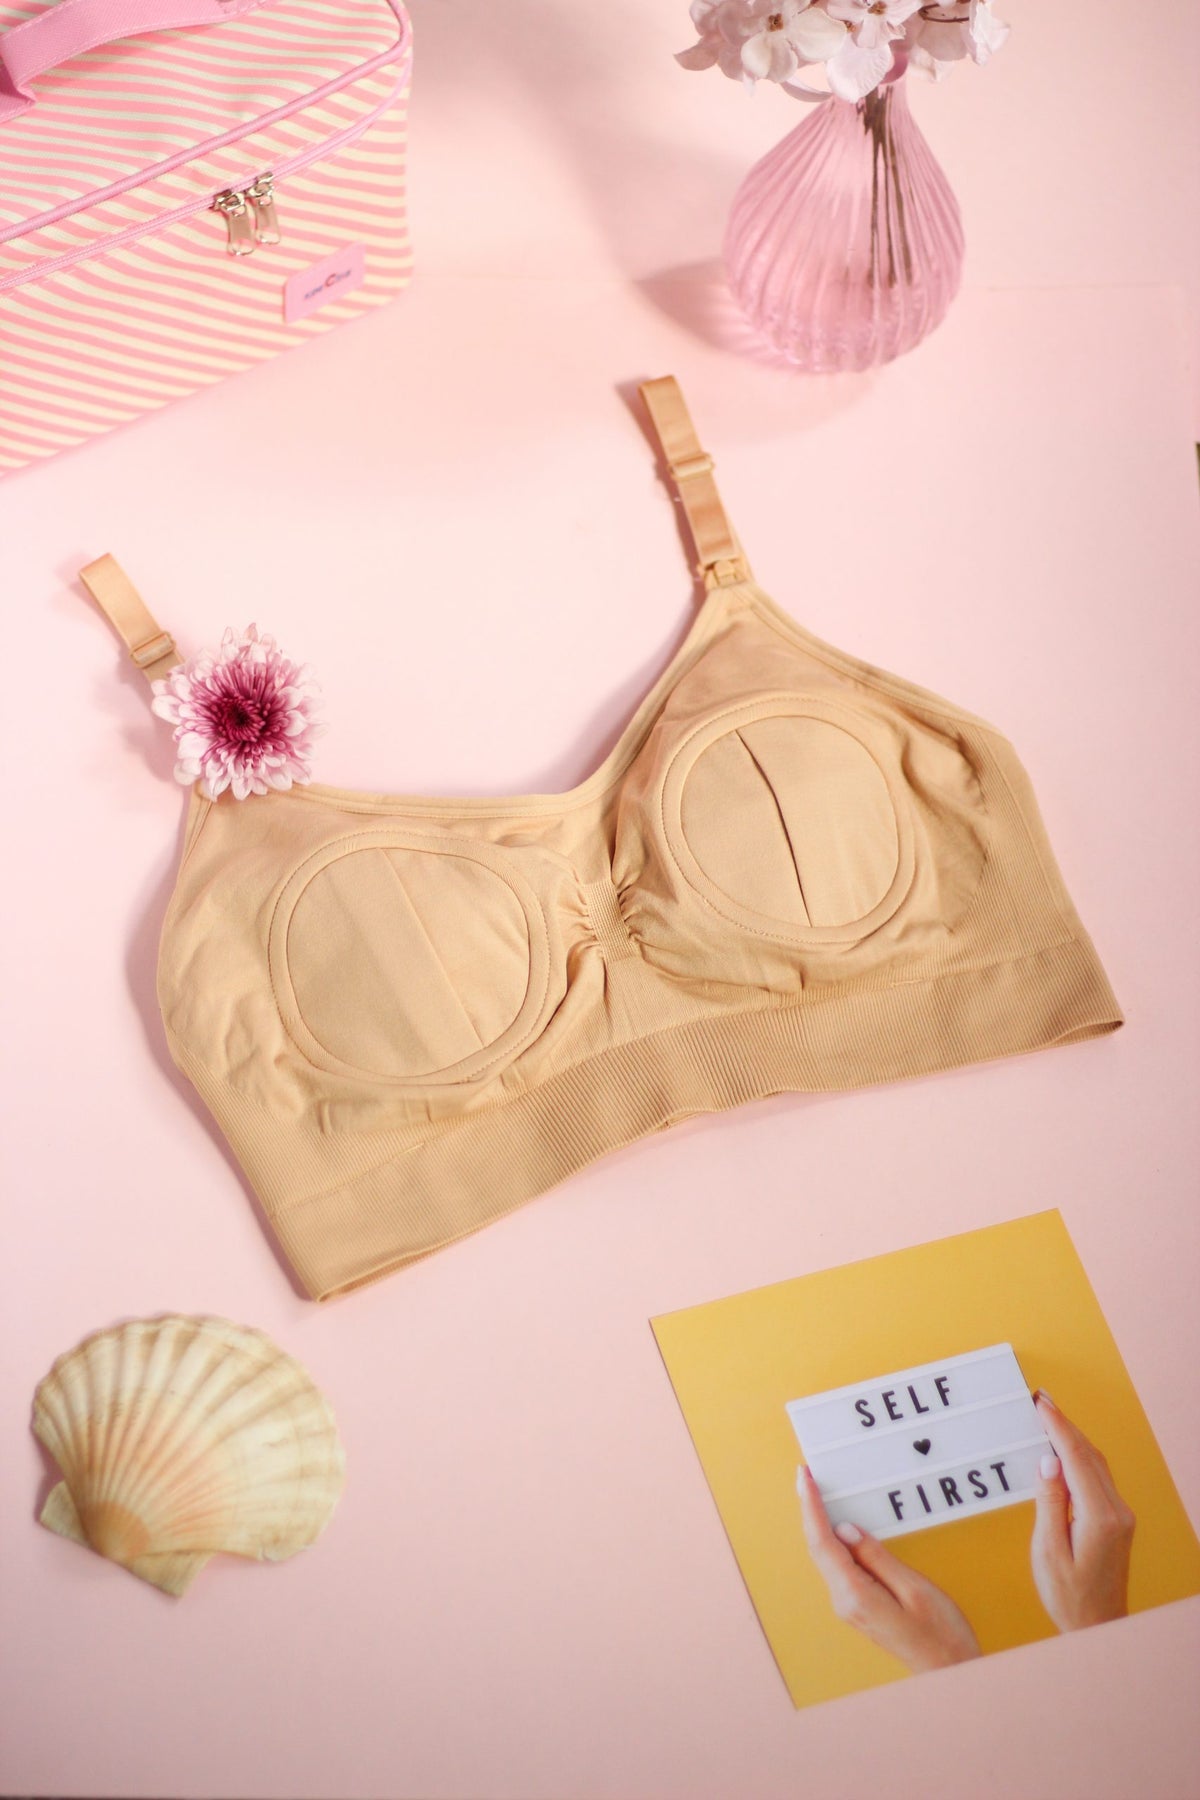 The Cozy Hands Free Pumping and Nursing Bra